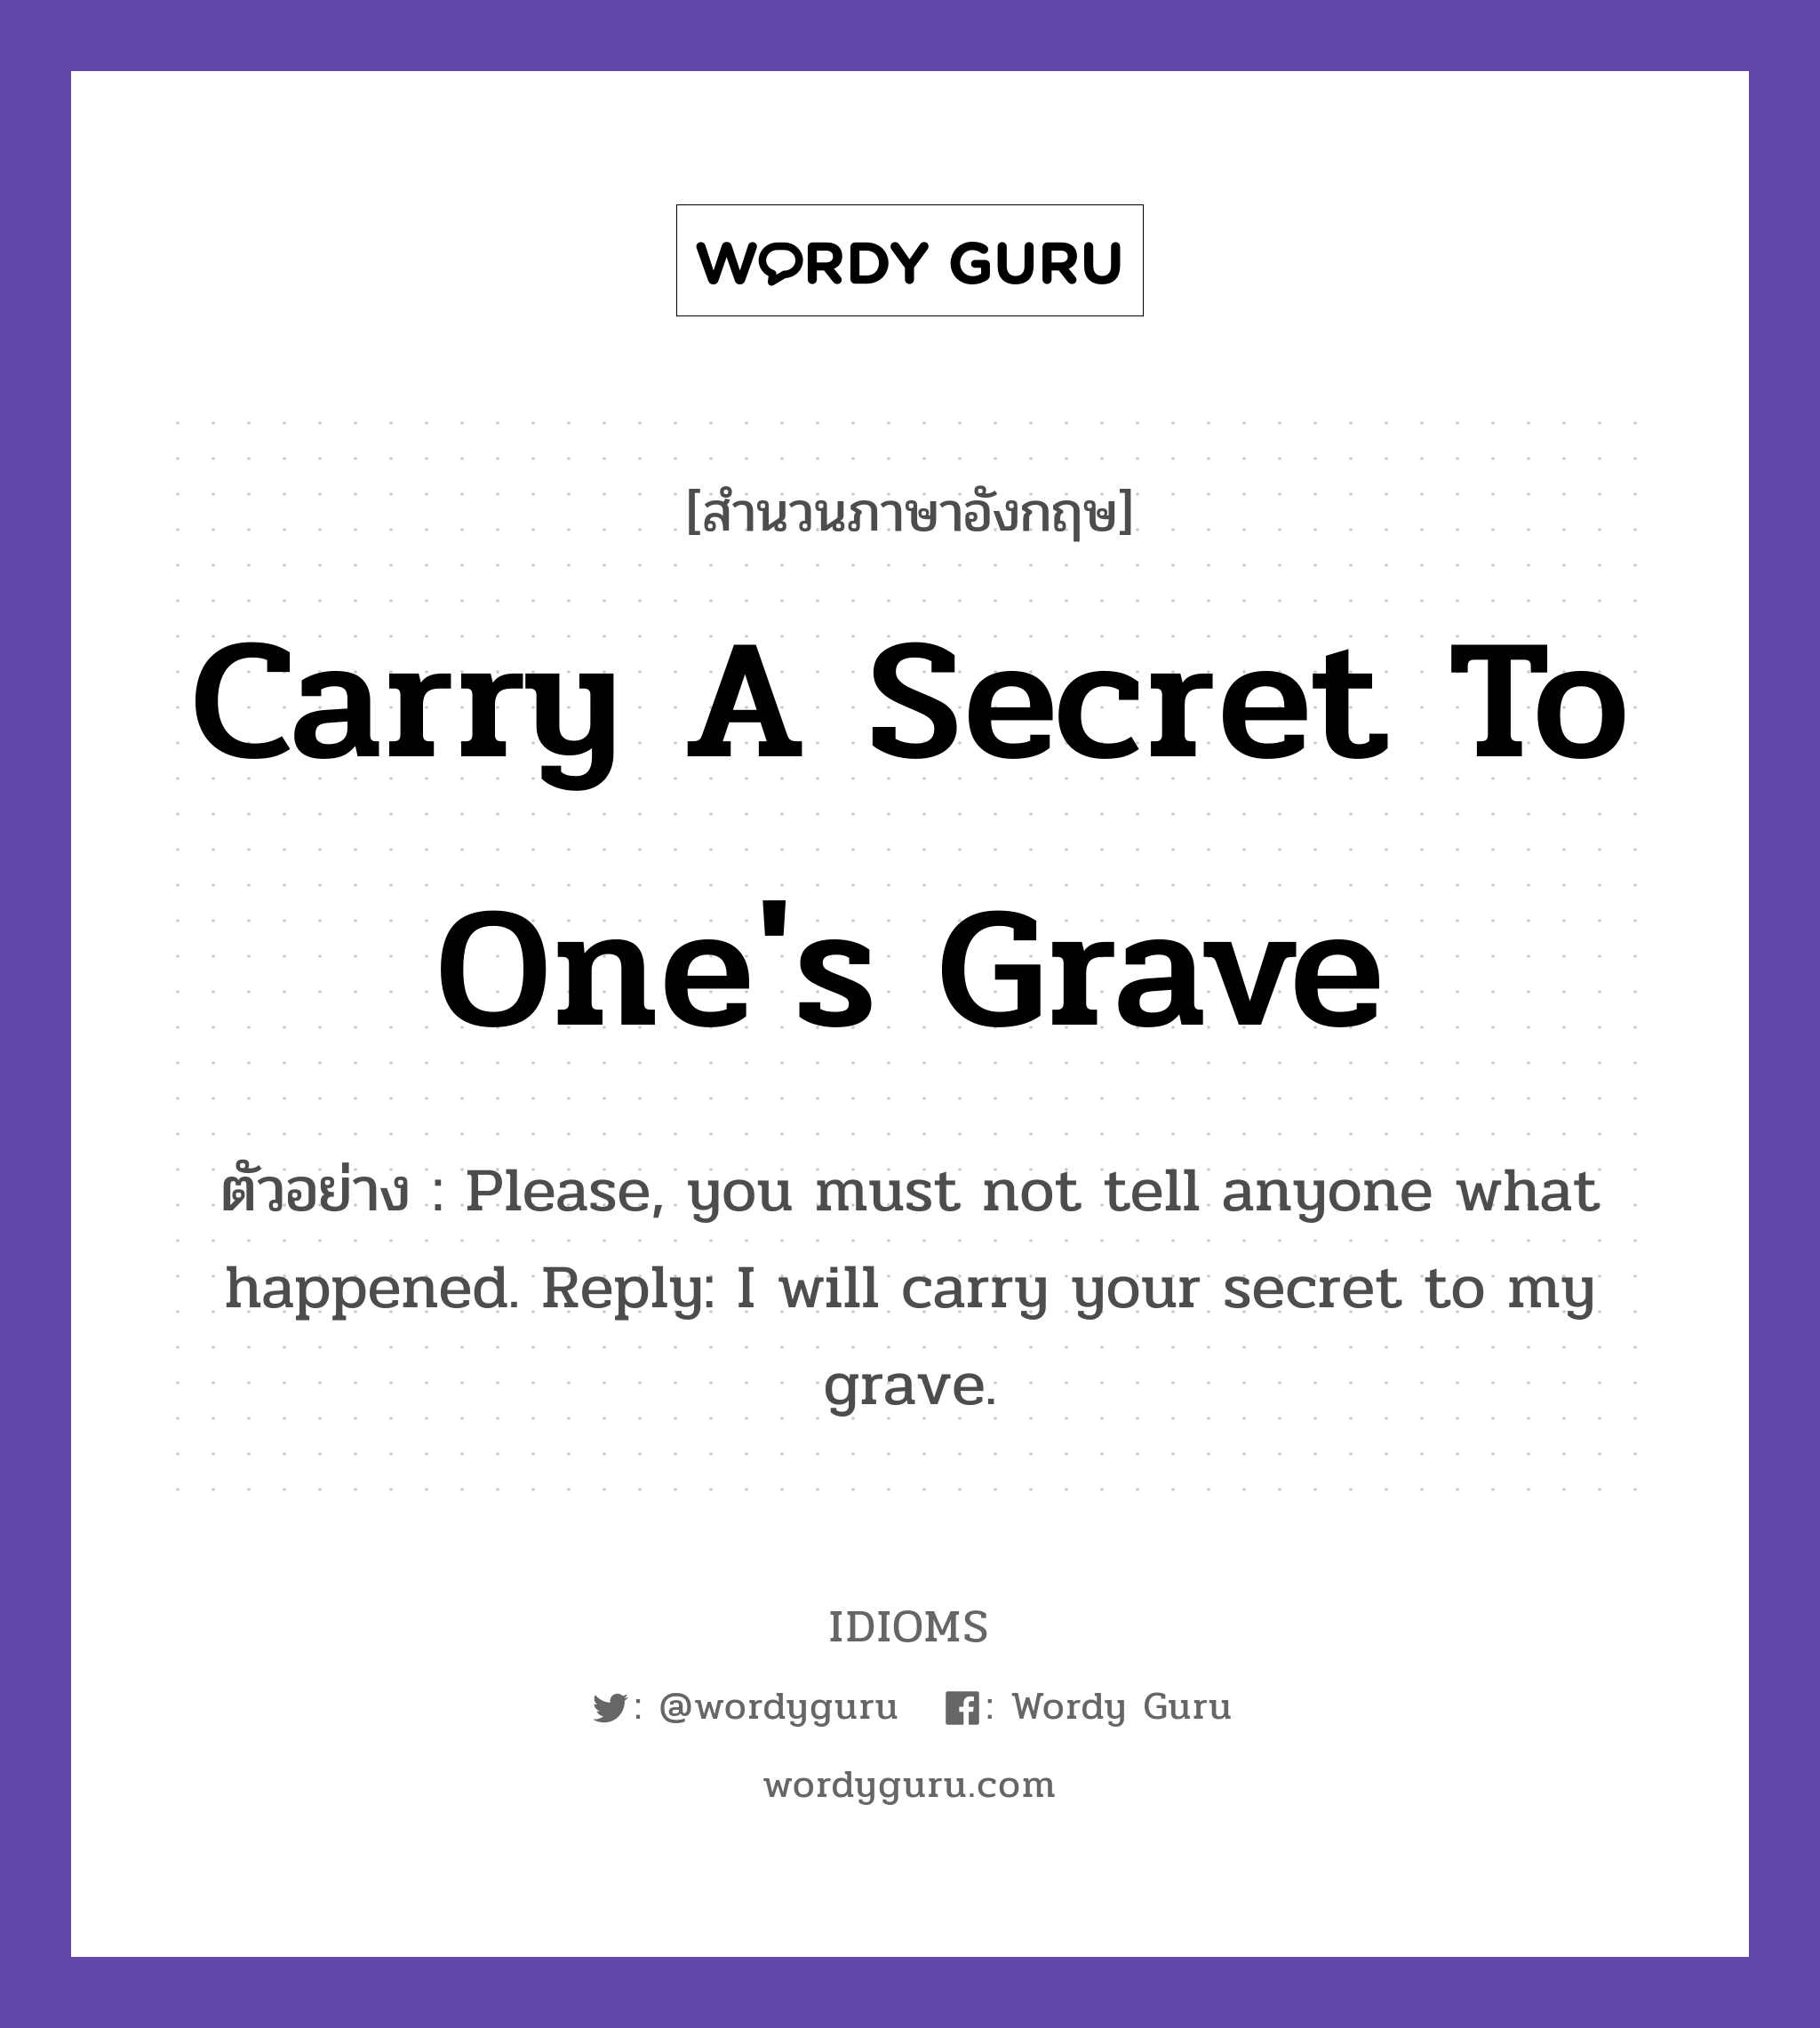 Carry A Secret To One's Grave แปลว่า?, สำนวนภาษาอังกฤษ Carry A Secret To One's Grave ตัวอย่าง Please, you must not tell anyone what happened. Reply: I will carry your secret to my grave.